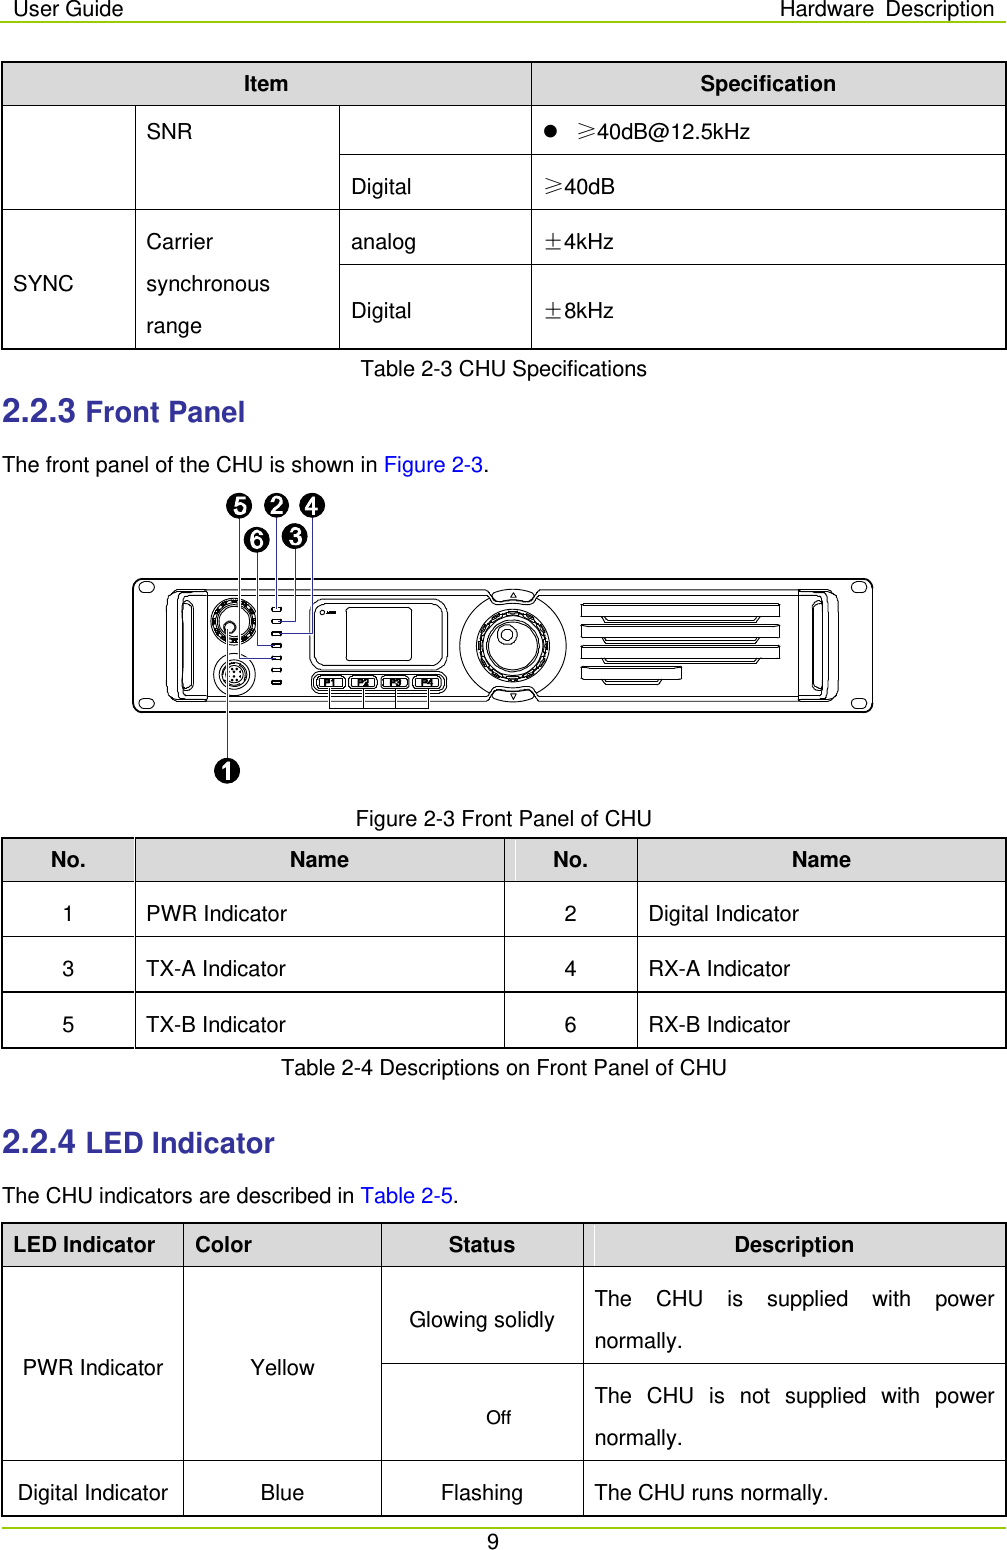 User Guide Hardware Description  9  Item Specification SNR  ≥40dB@12.5kHz Digital ≥40dB SYNC Carrier synchronous range analog ±4kHz Digital ±8kHz Table 2-3 CHU Specifications 2.2.3 Front Panel The front panel of the CHU is shown in Figure 2-3.    Figure 2-3 Front Panel of CHU No. Name No. Name 1  PWR Indicator  2  Digital Indicator 3  TX-A Indicator    4  RX-A Indicator 5  TX-B Indicator  6  RX-B Indicator Table 2-4 Descriptions on Front Panel of CHU  2.2.4 LED Indicator The CHU indicators are described in Table 2-5. LED Indicator Color Status Description PWR Indicator   Yellow Glowing solidly The CHU is supplied with power normally. Off The CHU is not supplied with power normally. Digital Indicator Blue Flashing The CHU runs normally. 